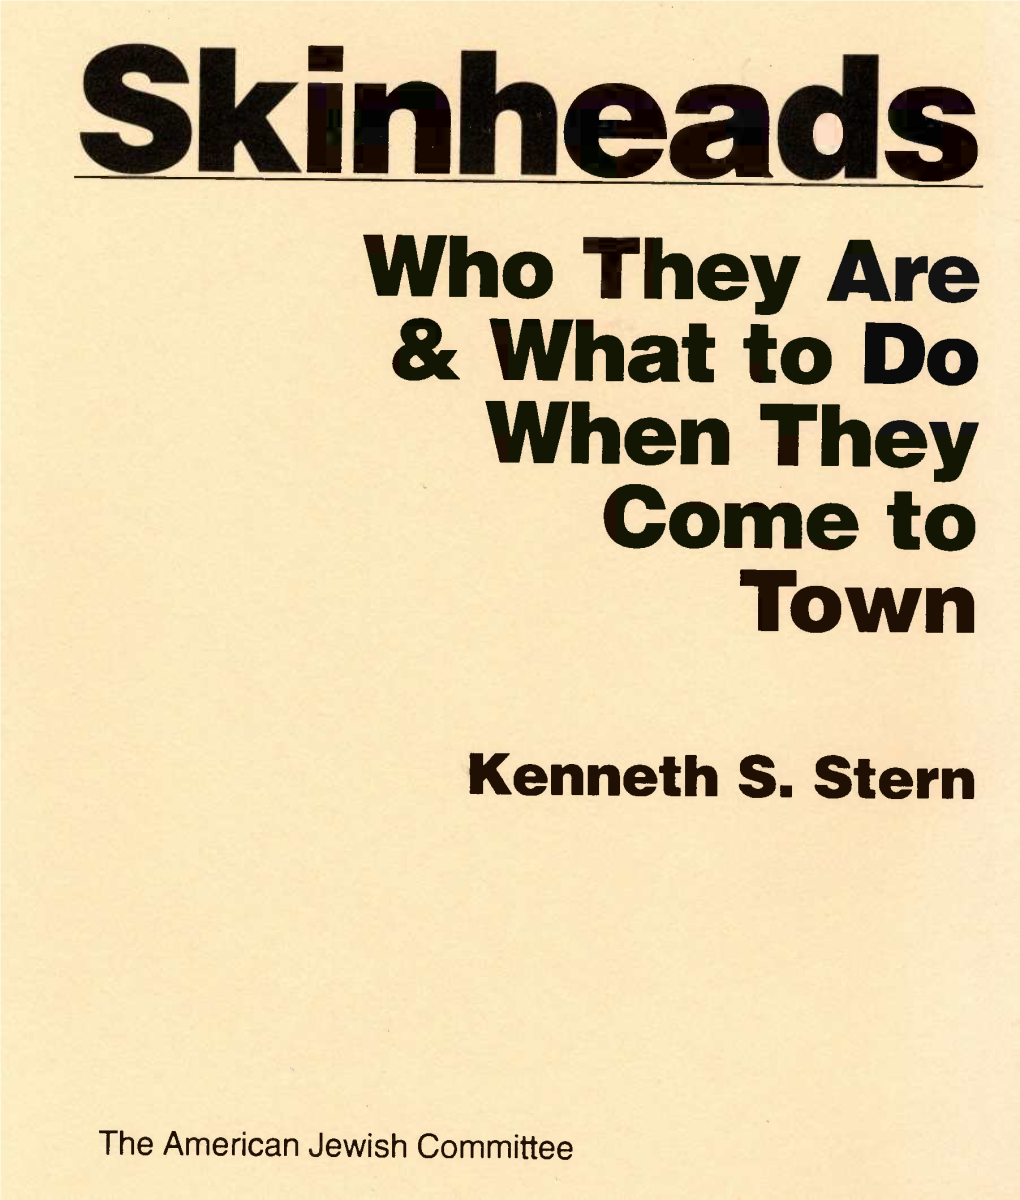 Skinheads Who They Are & What to Do When They Come to Town